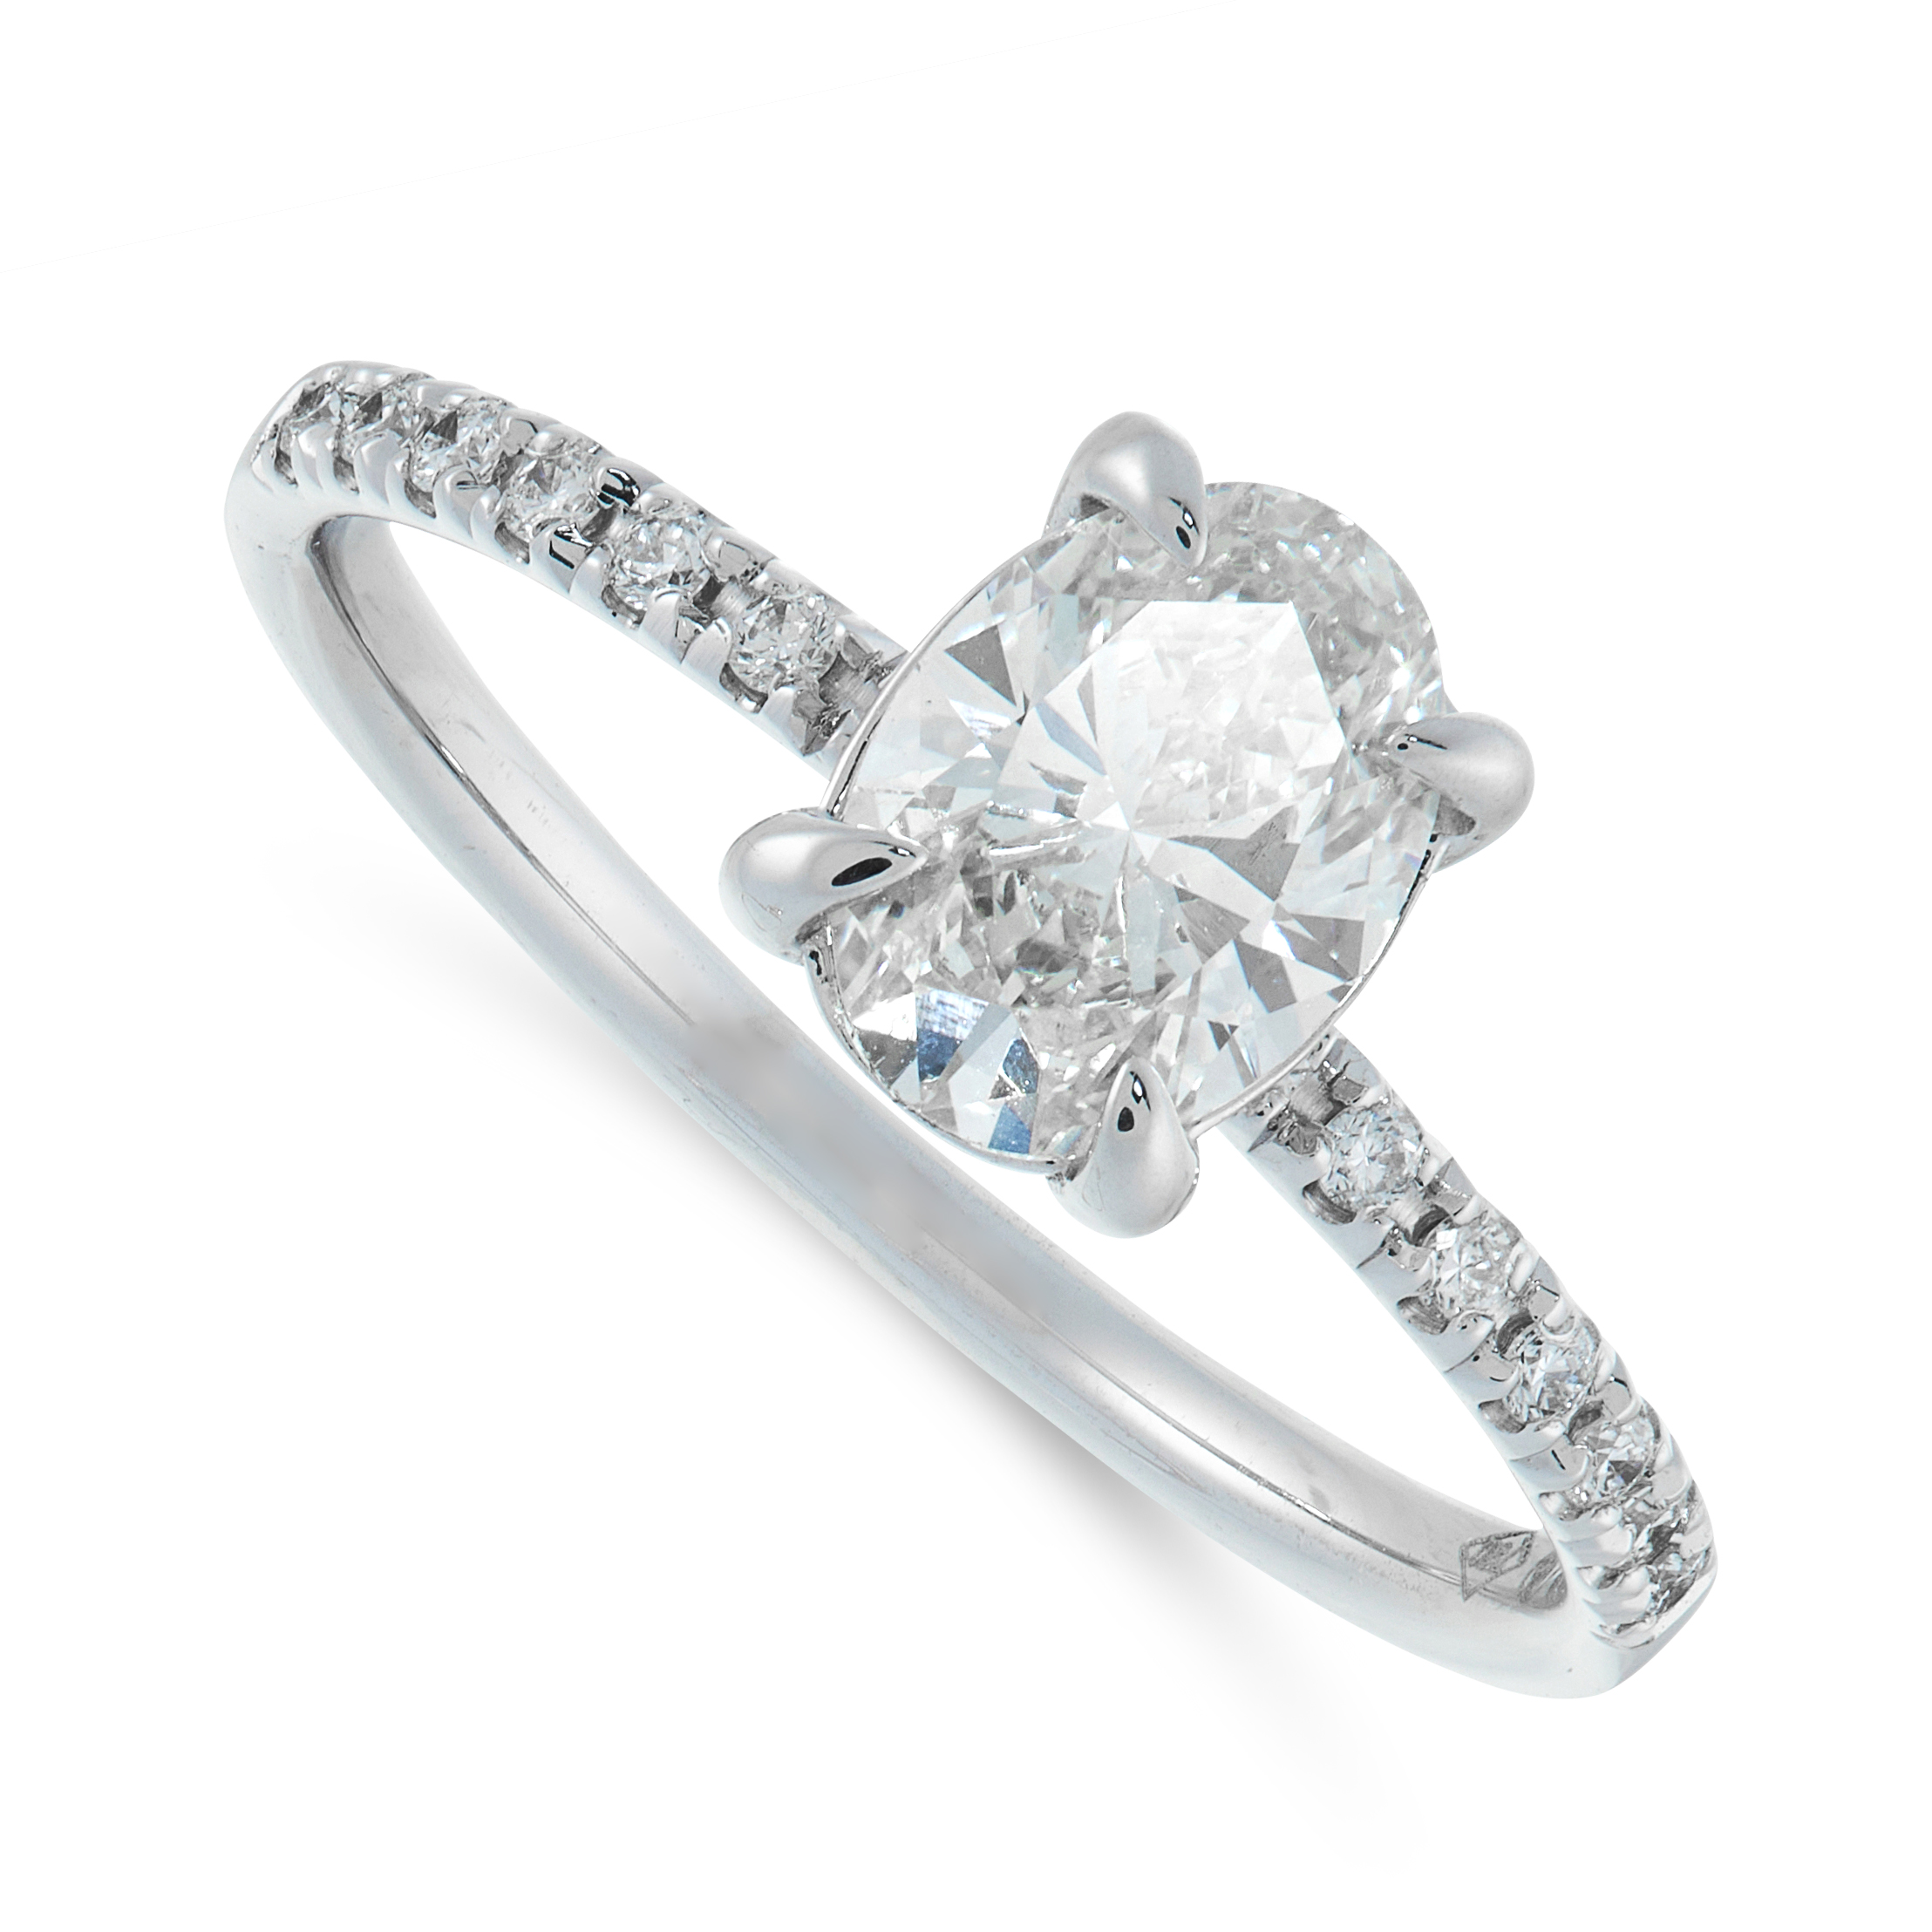 A SOLITAIRE DIAMOND DRESS RING in 18ct white gold, set with an oval cut diamond of 0.97 carats,